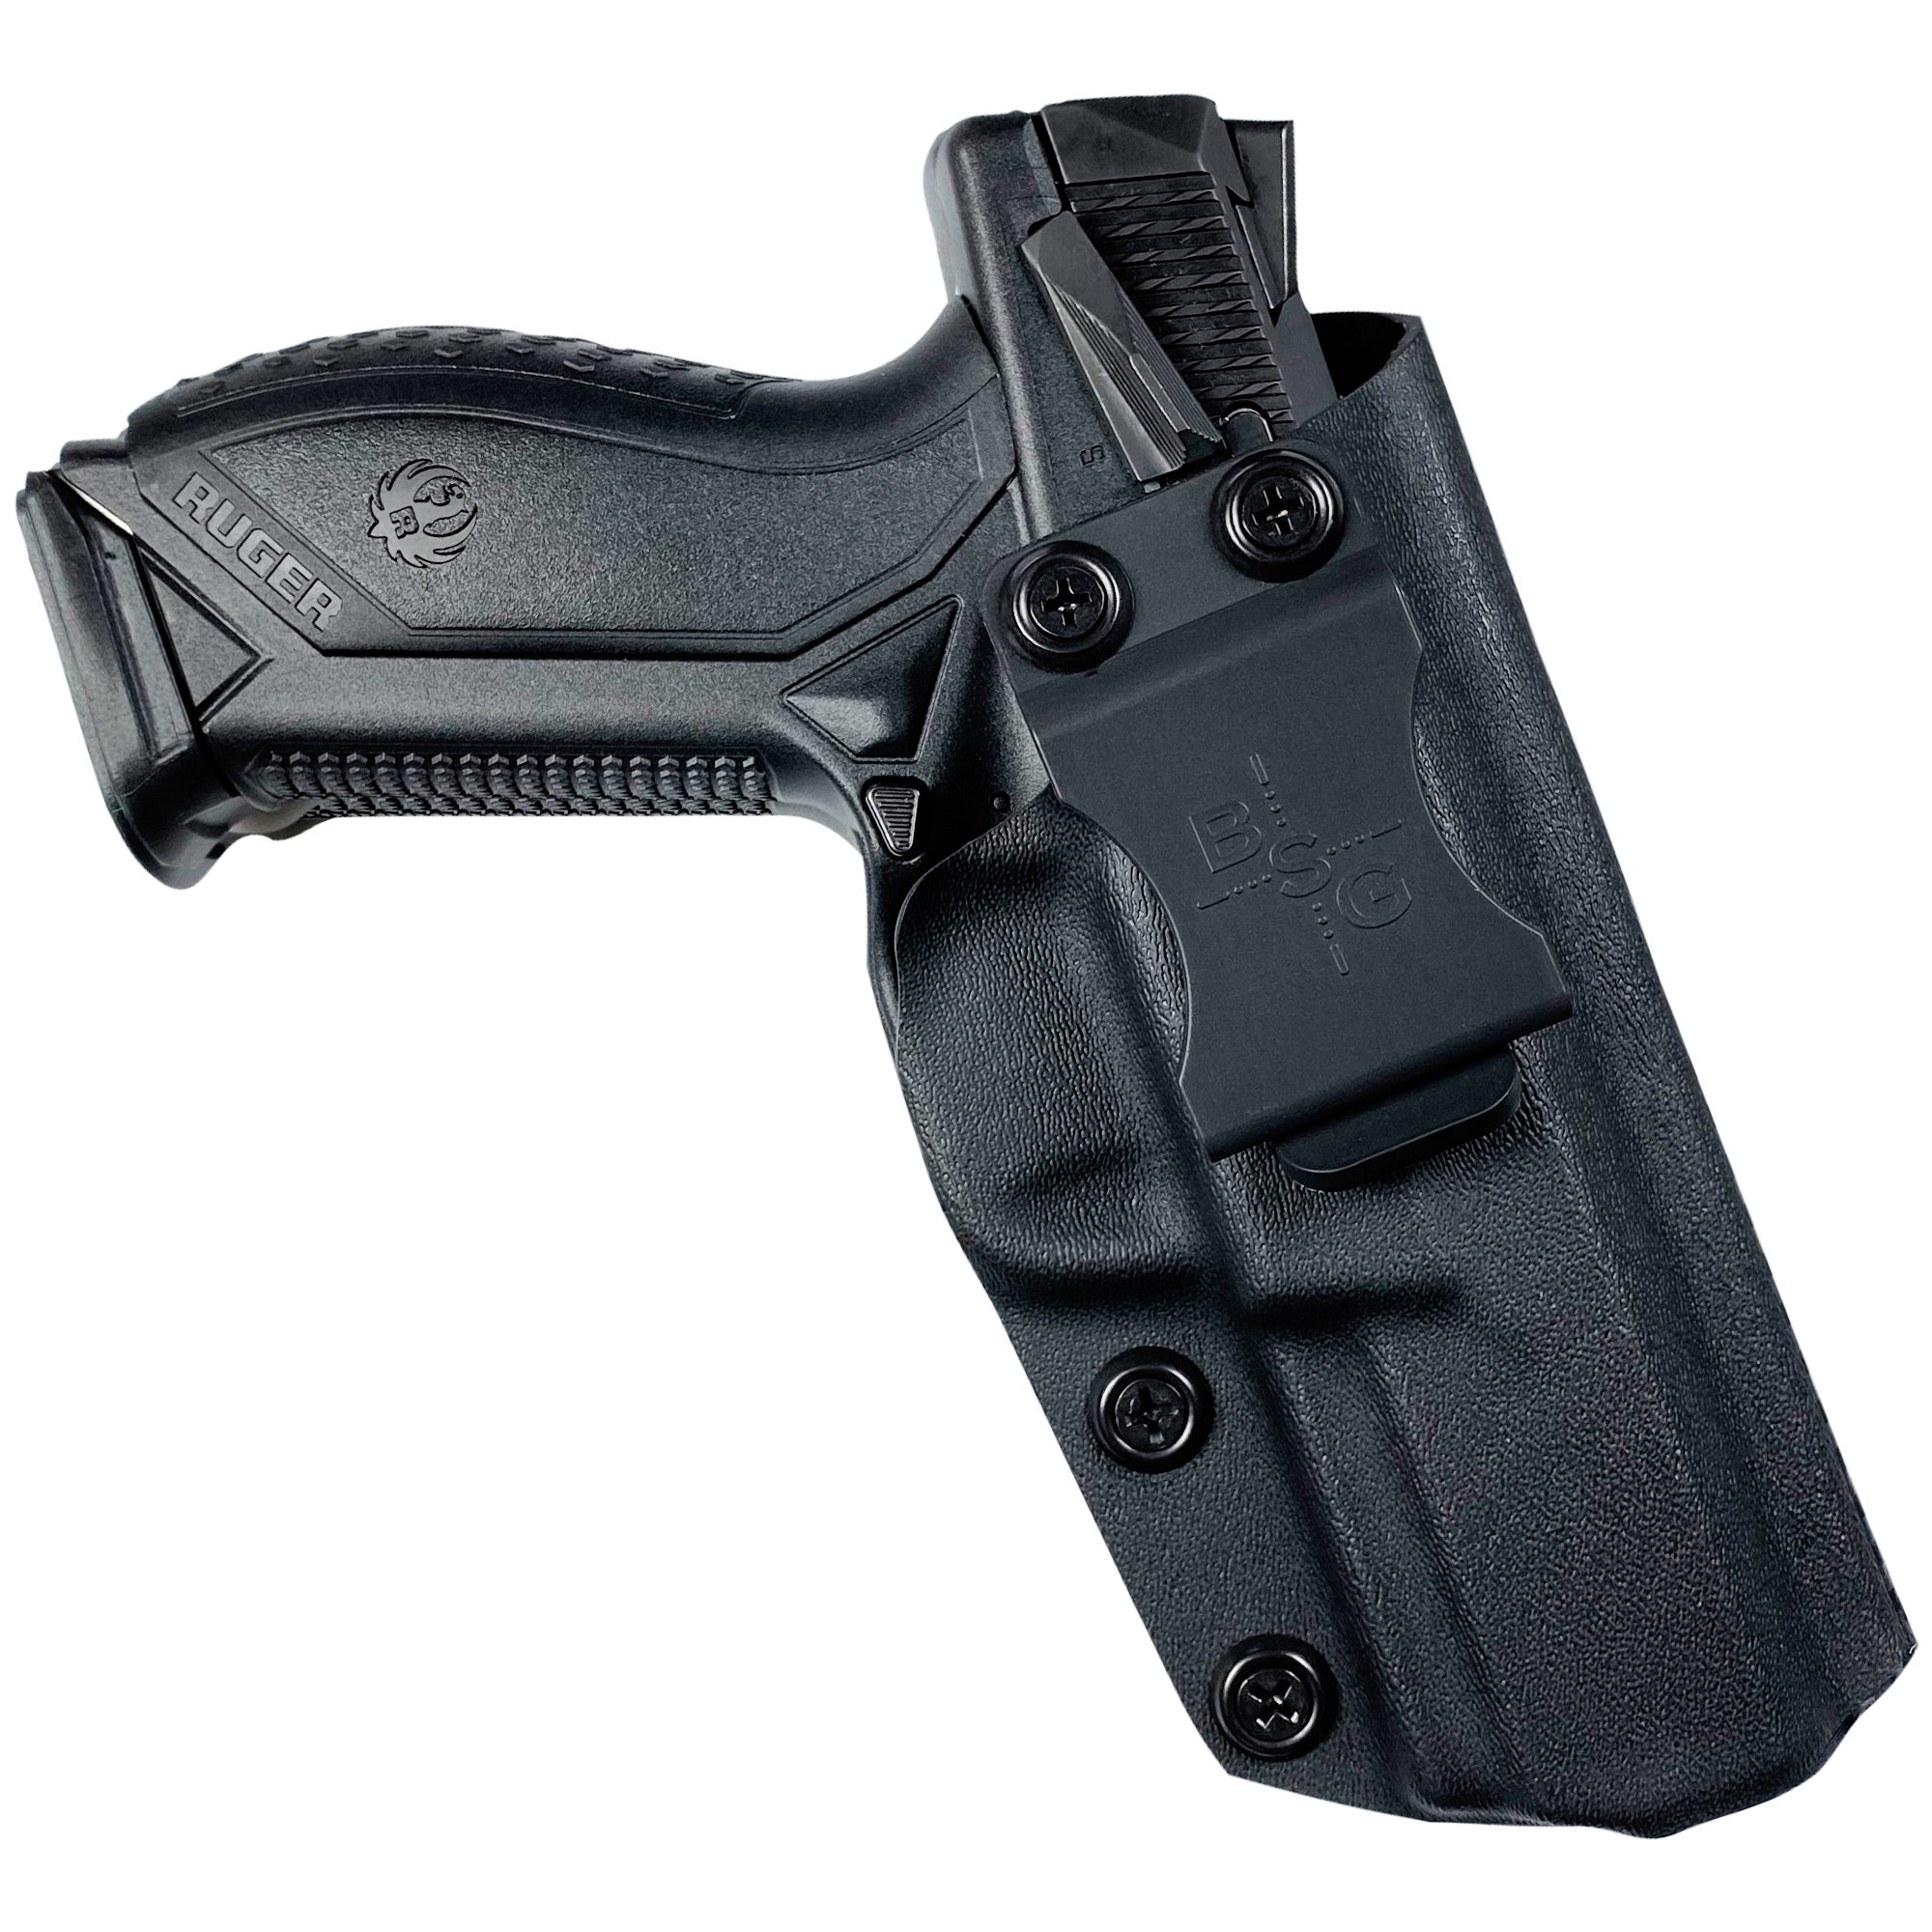 Ruger-American-4.20''-IWB-Holster-in-Black-Kydex-Finish